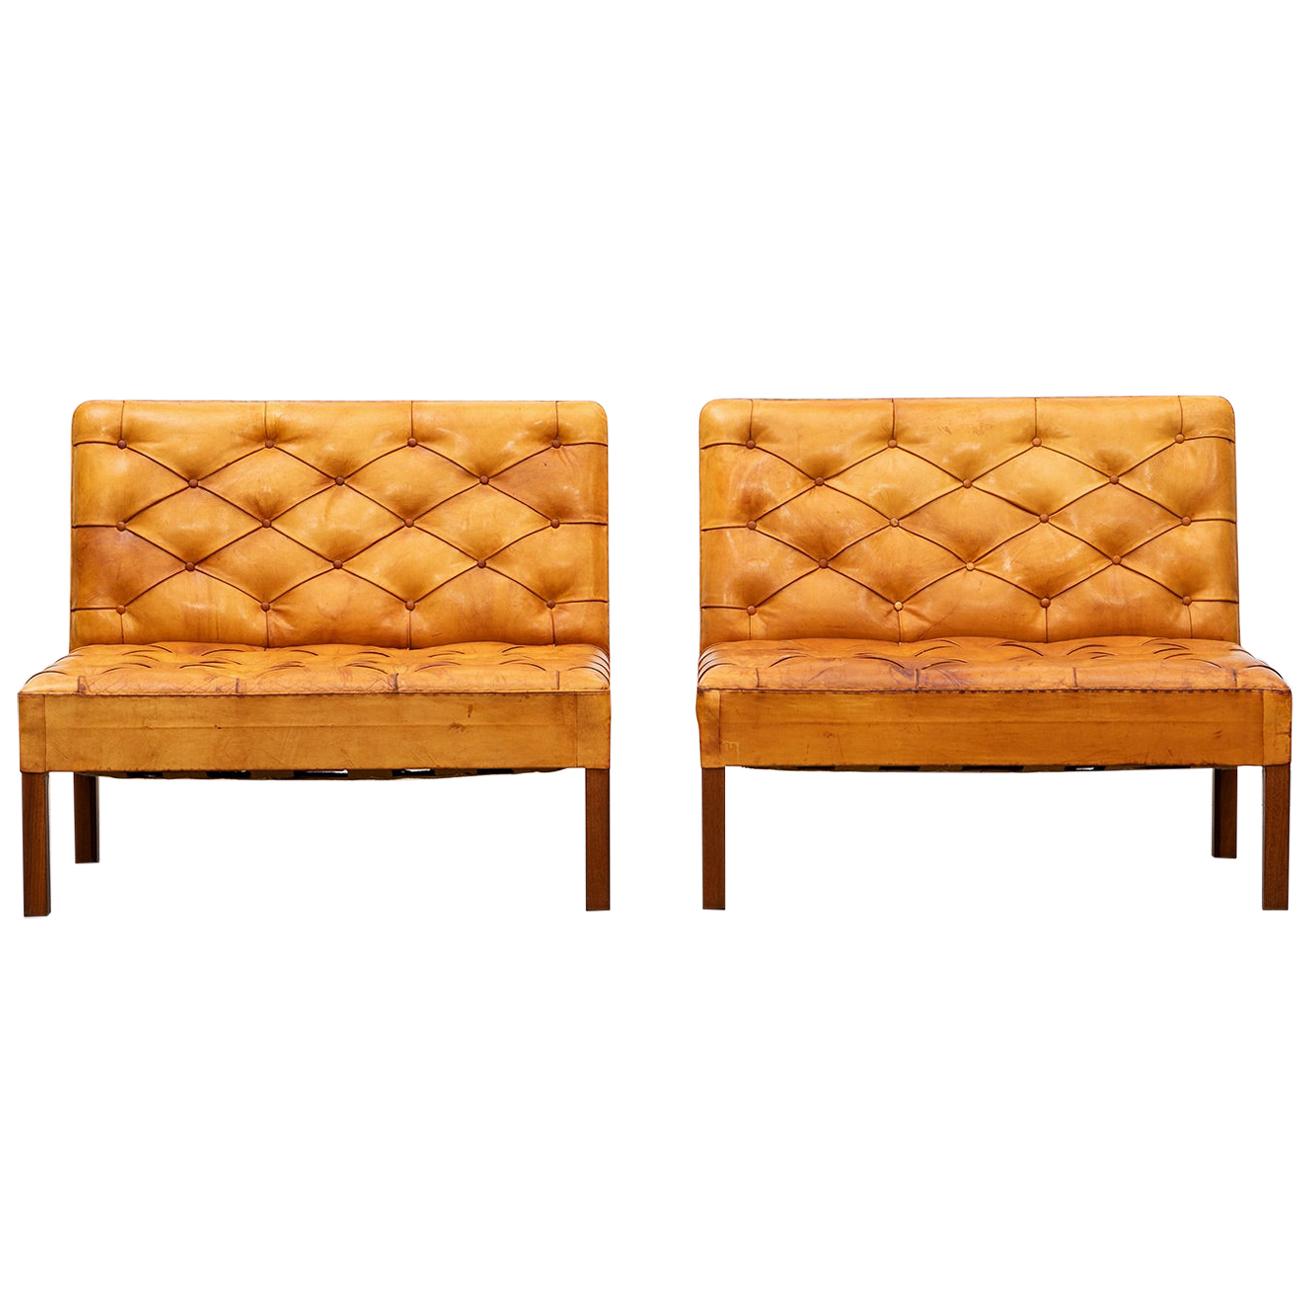 1970s Cognac Leather and Mahogany Pair of Sofa Units by Kaare Klint For Sale